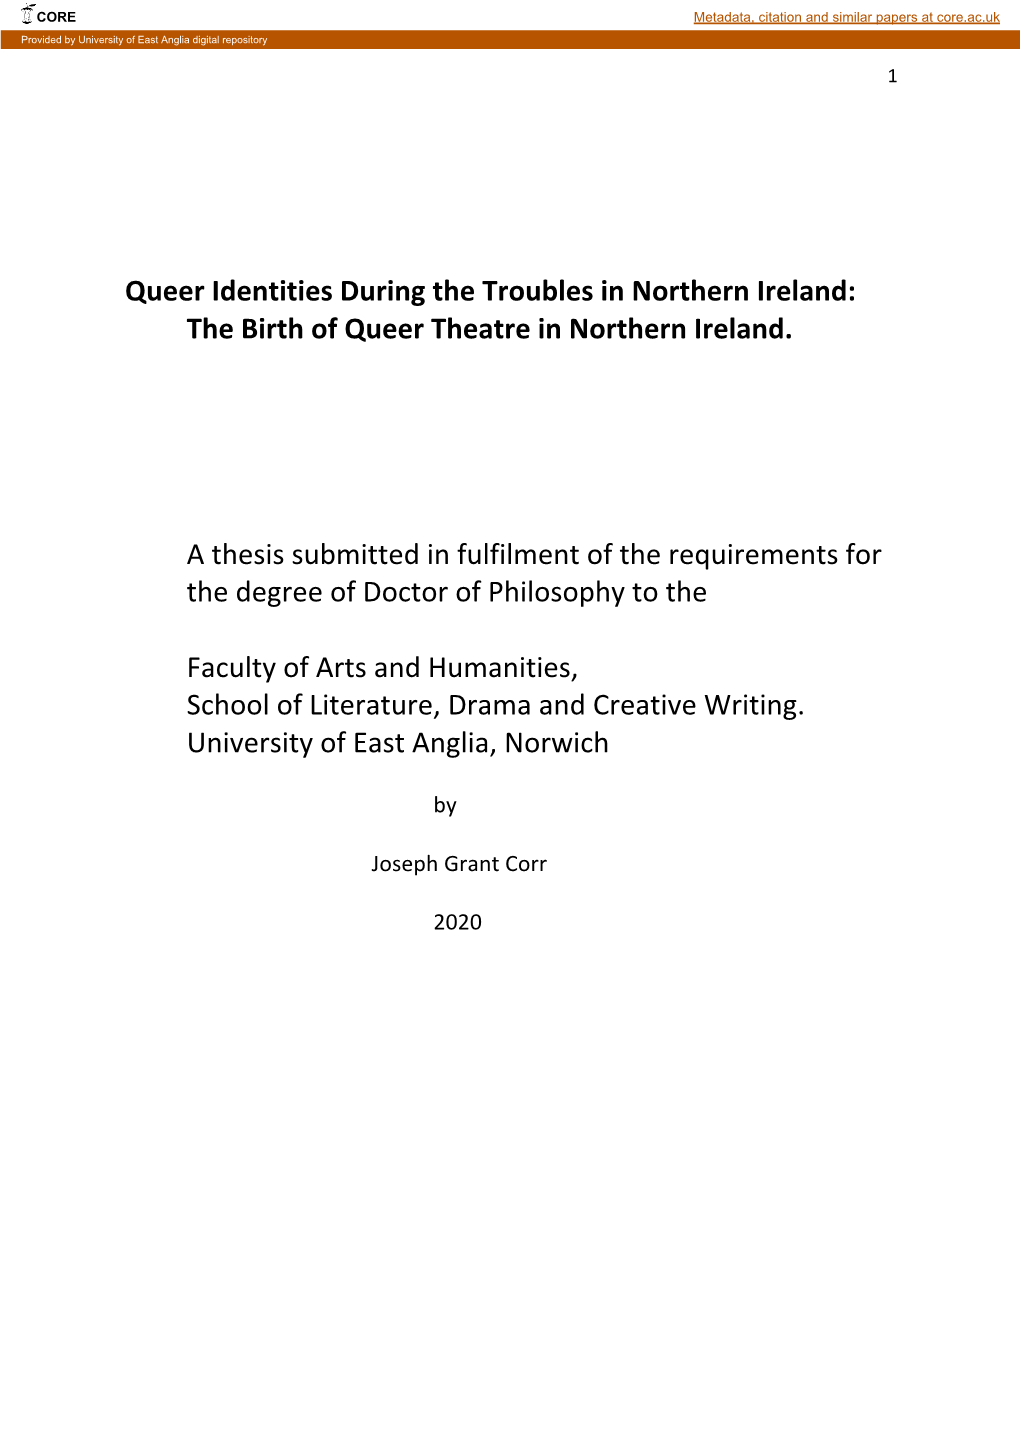 Queer Identities During the Troubles in Northern Ireland: the Birth of Queer Theatre in Northern Ireland